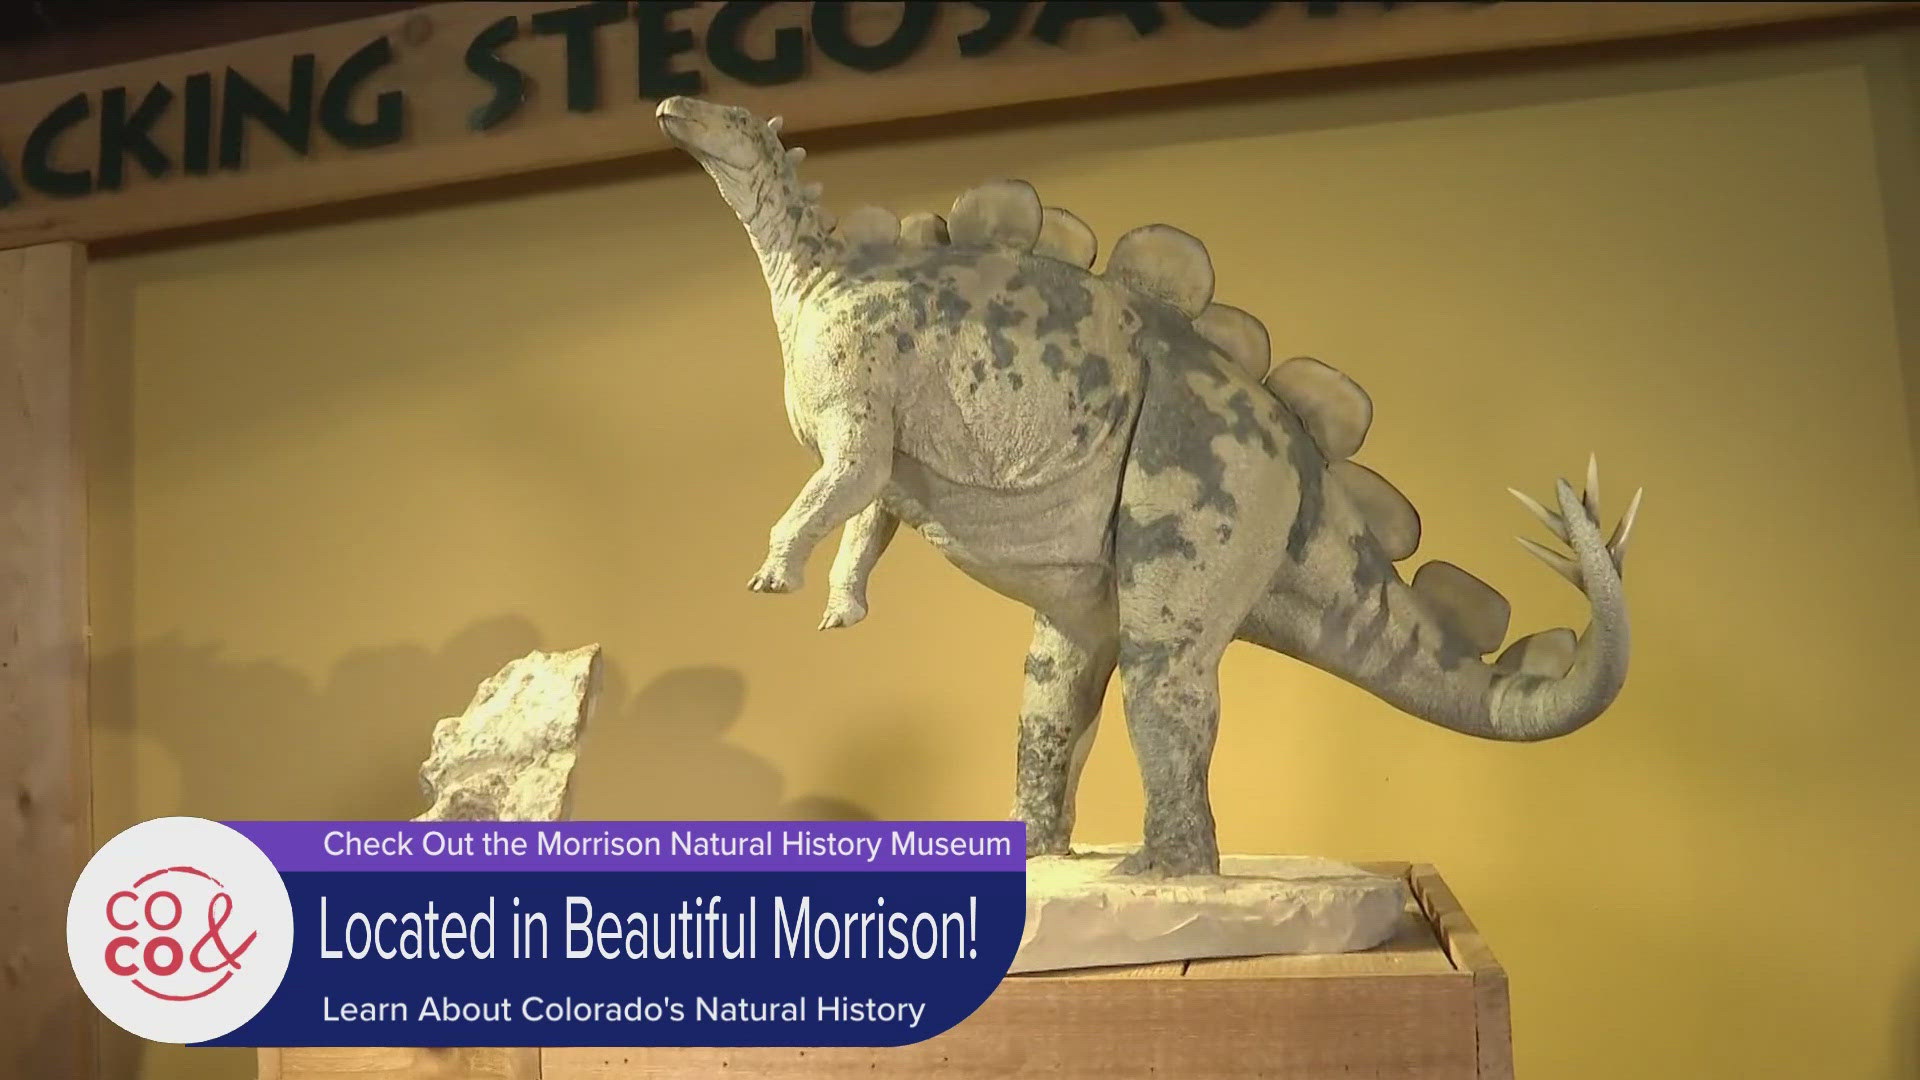 Celebrate Stegosaurus Day with the team at the Morrison Natural History Museum. Learn more and check out their events at MNHM.org.